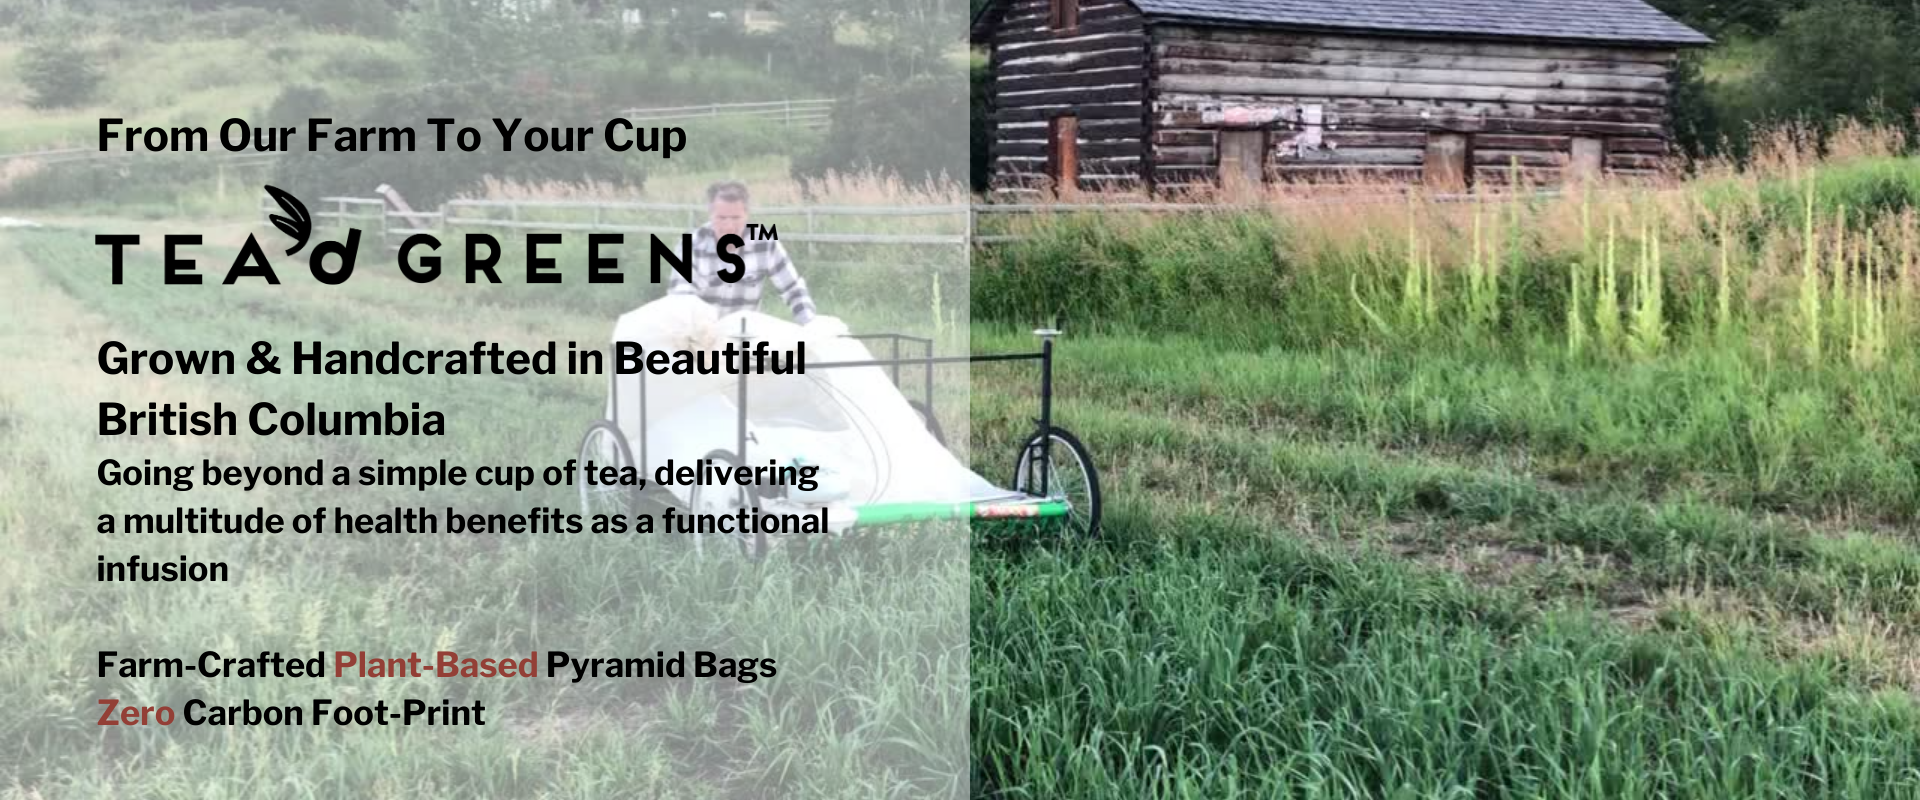 Load video: From our farm to your cup video